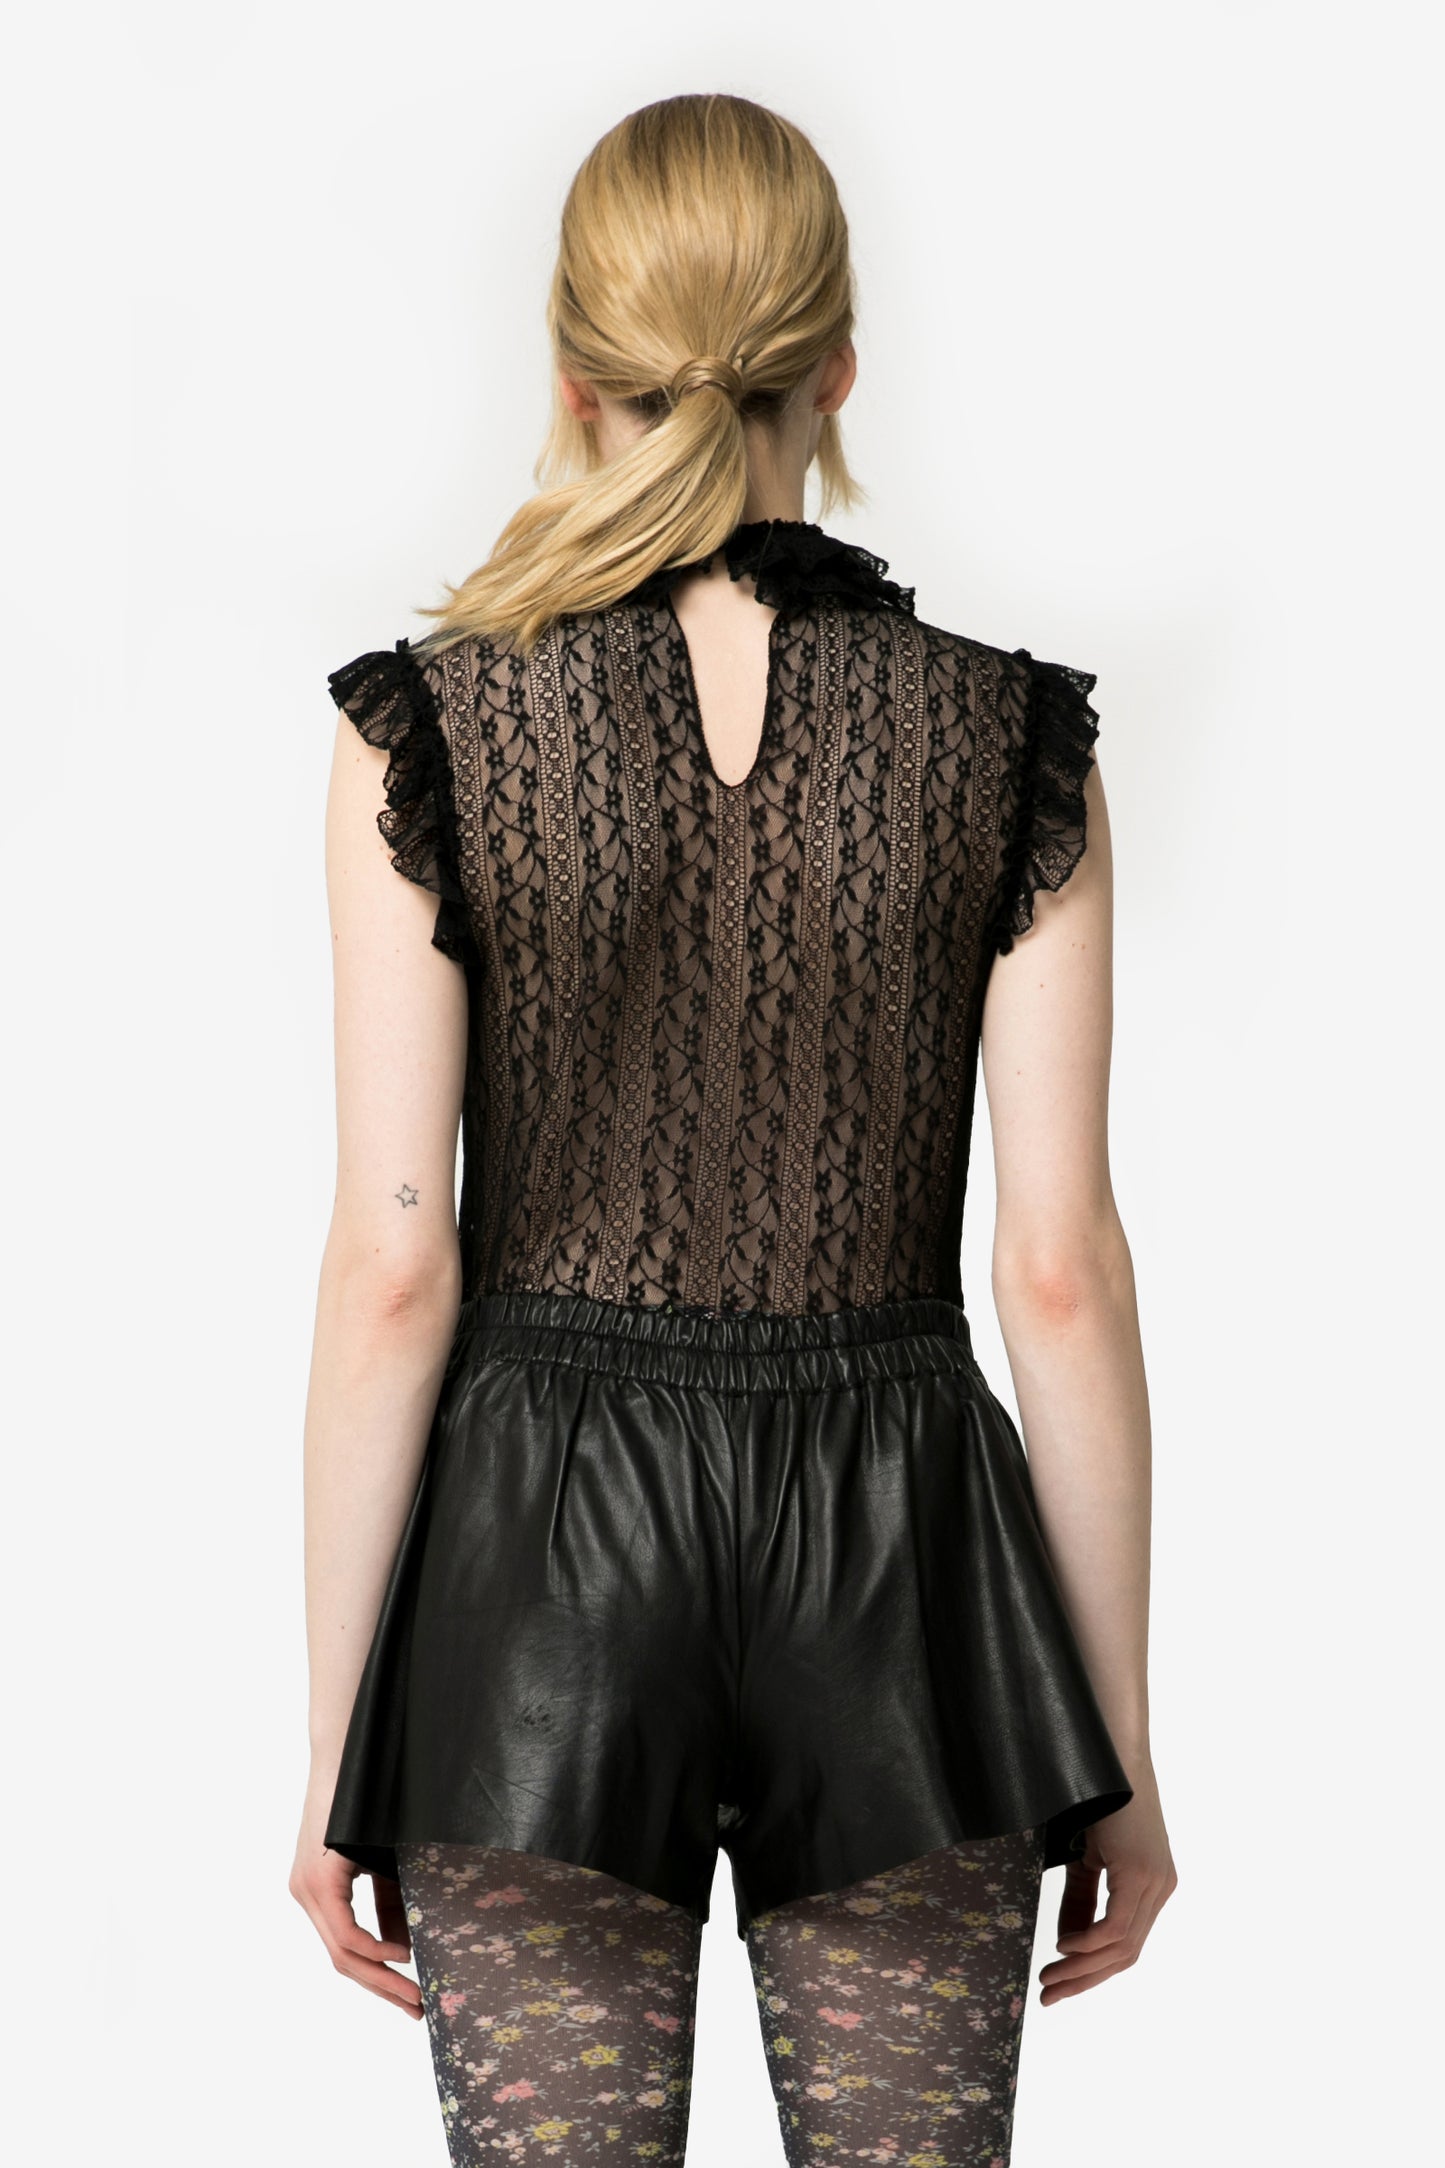 HESTER - Undress lace top